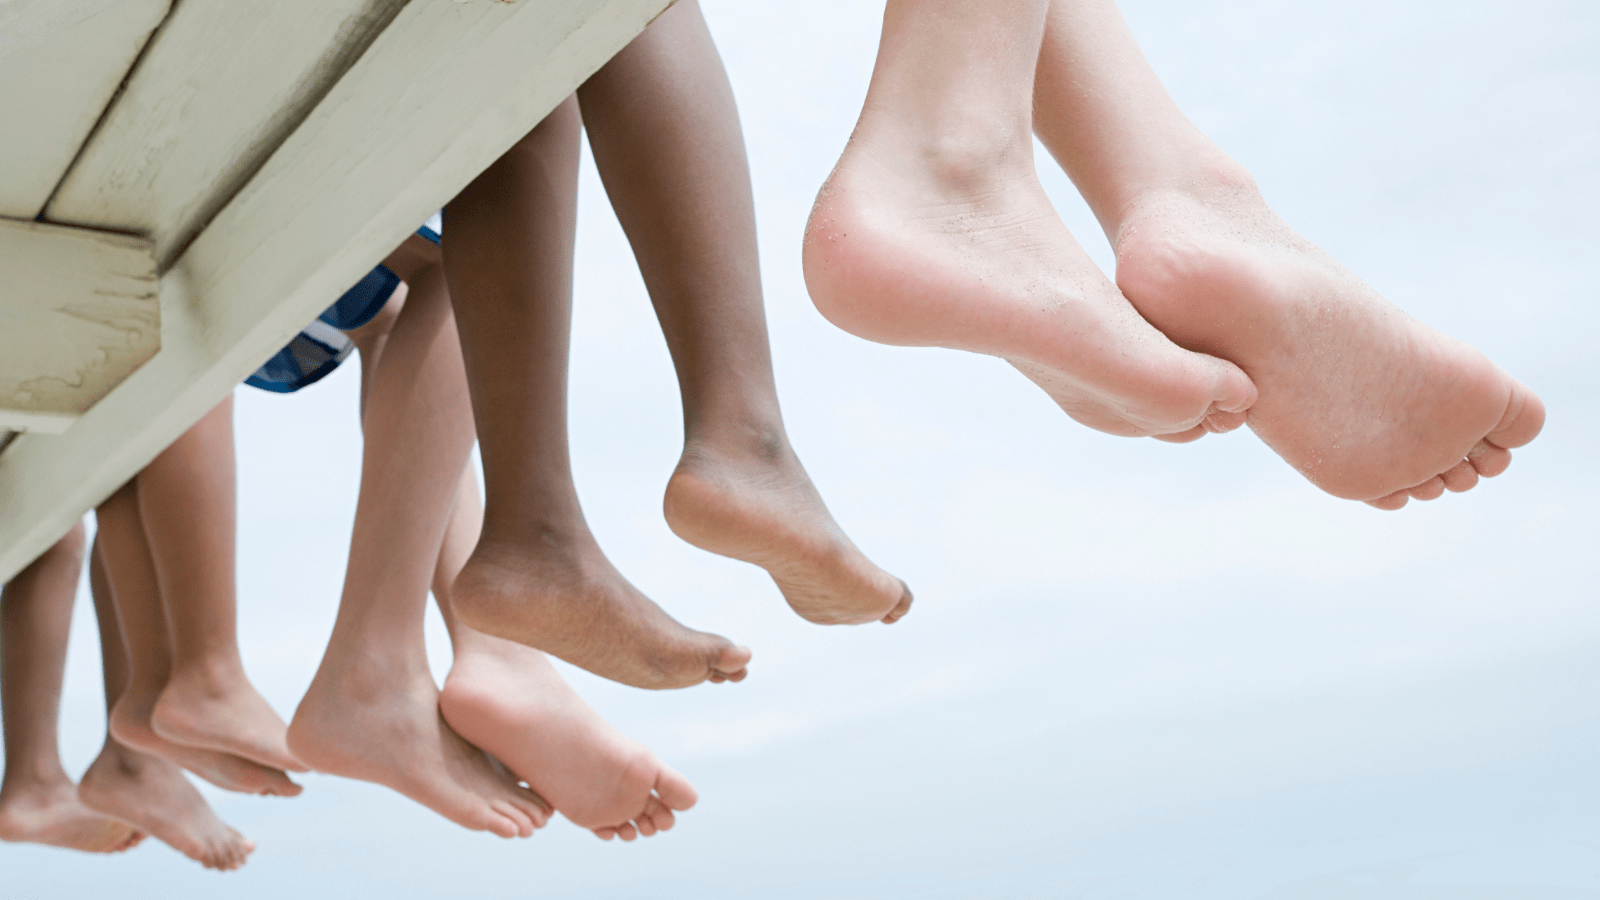 What can I expect from an ingrown toenail surgery appointment?